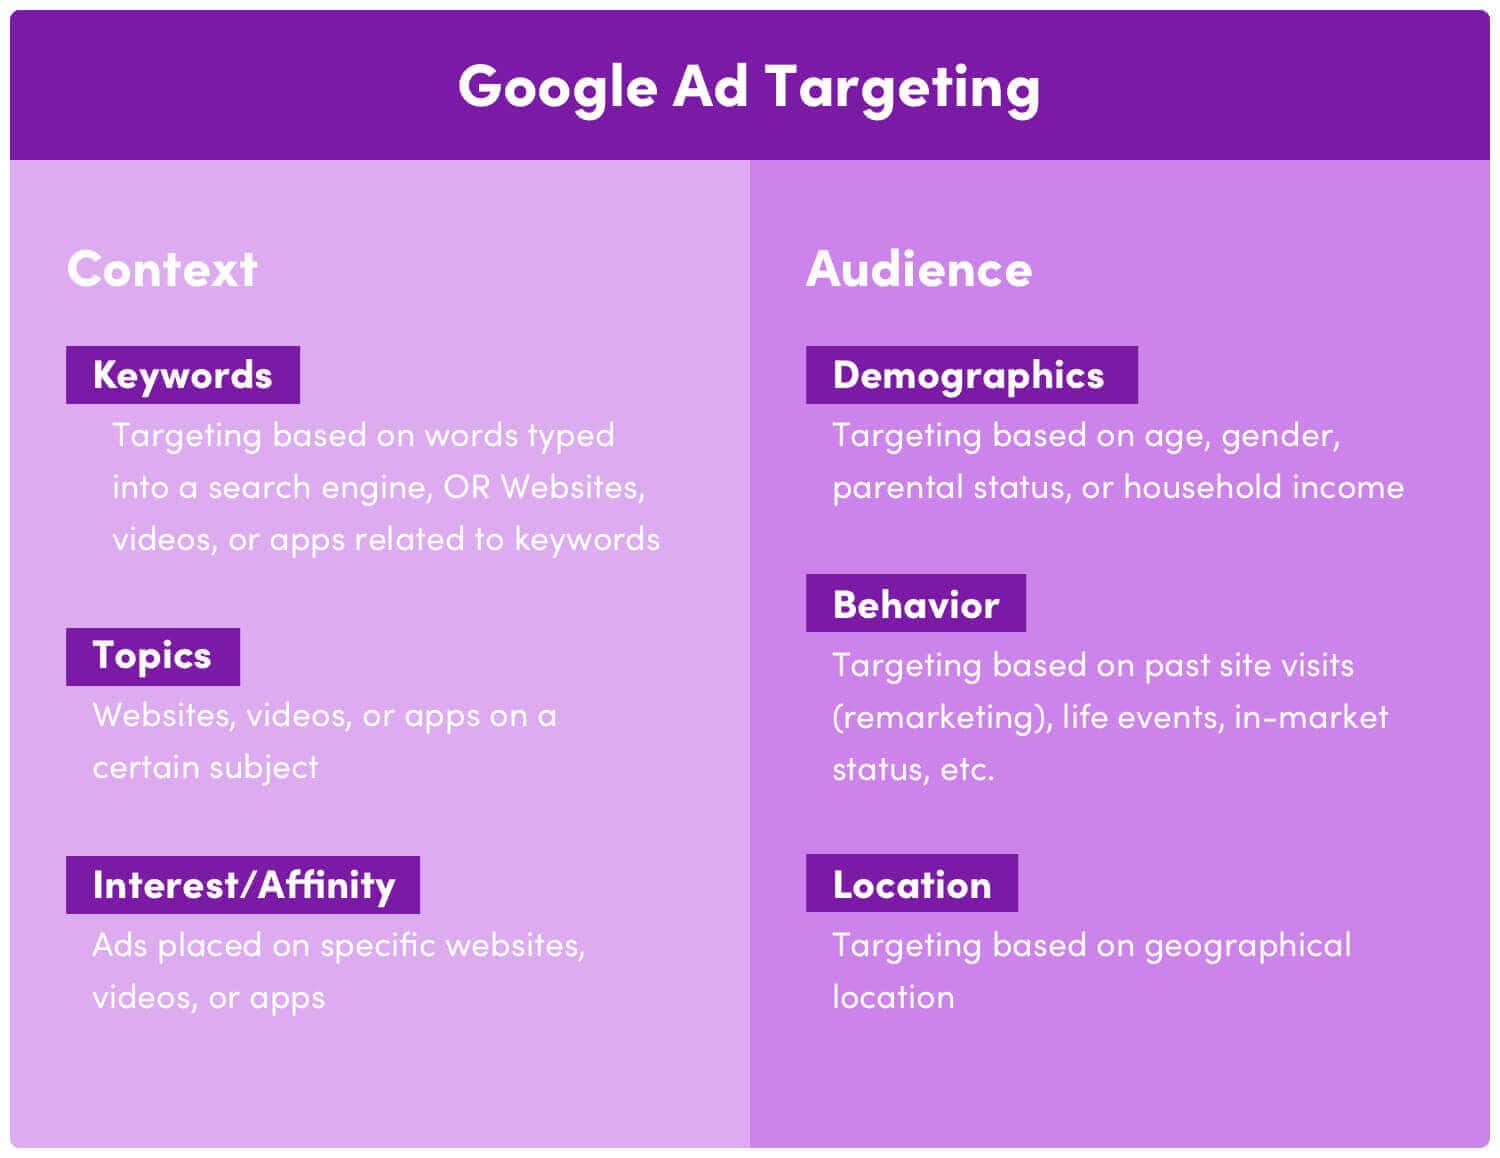 A table labeled “Google Ad Targeting” with two Categories: Context and Audience. Under “Context” there are three subcategories: Keywords, Topics, and Interest/Affinity. Under “Audience” there are three subcategories: Demographics, Behavior, and Location. 